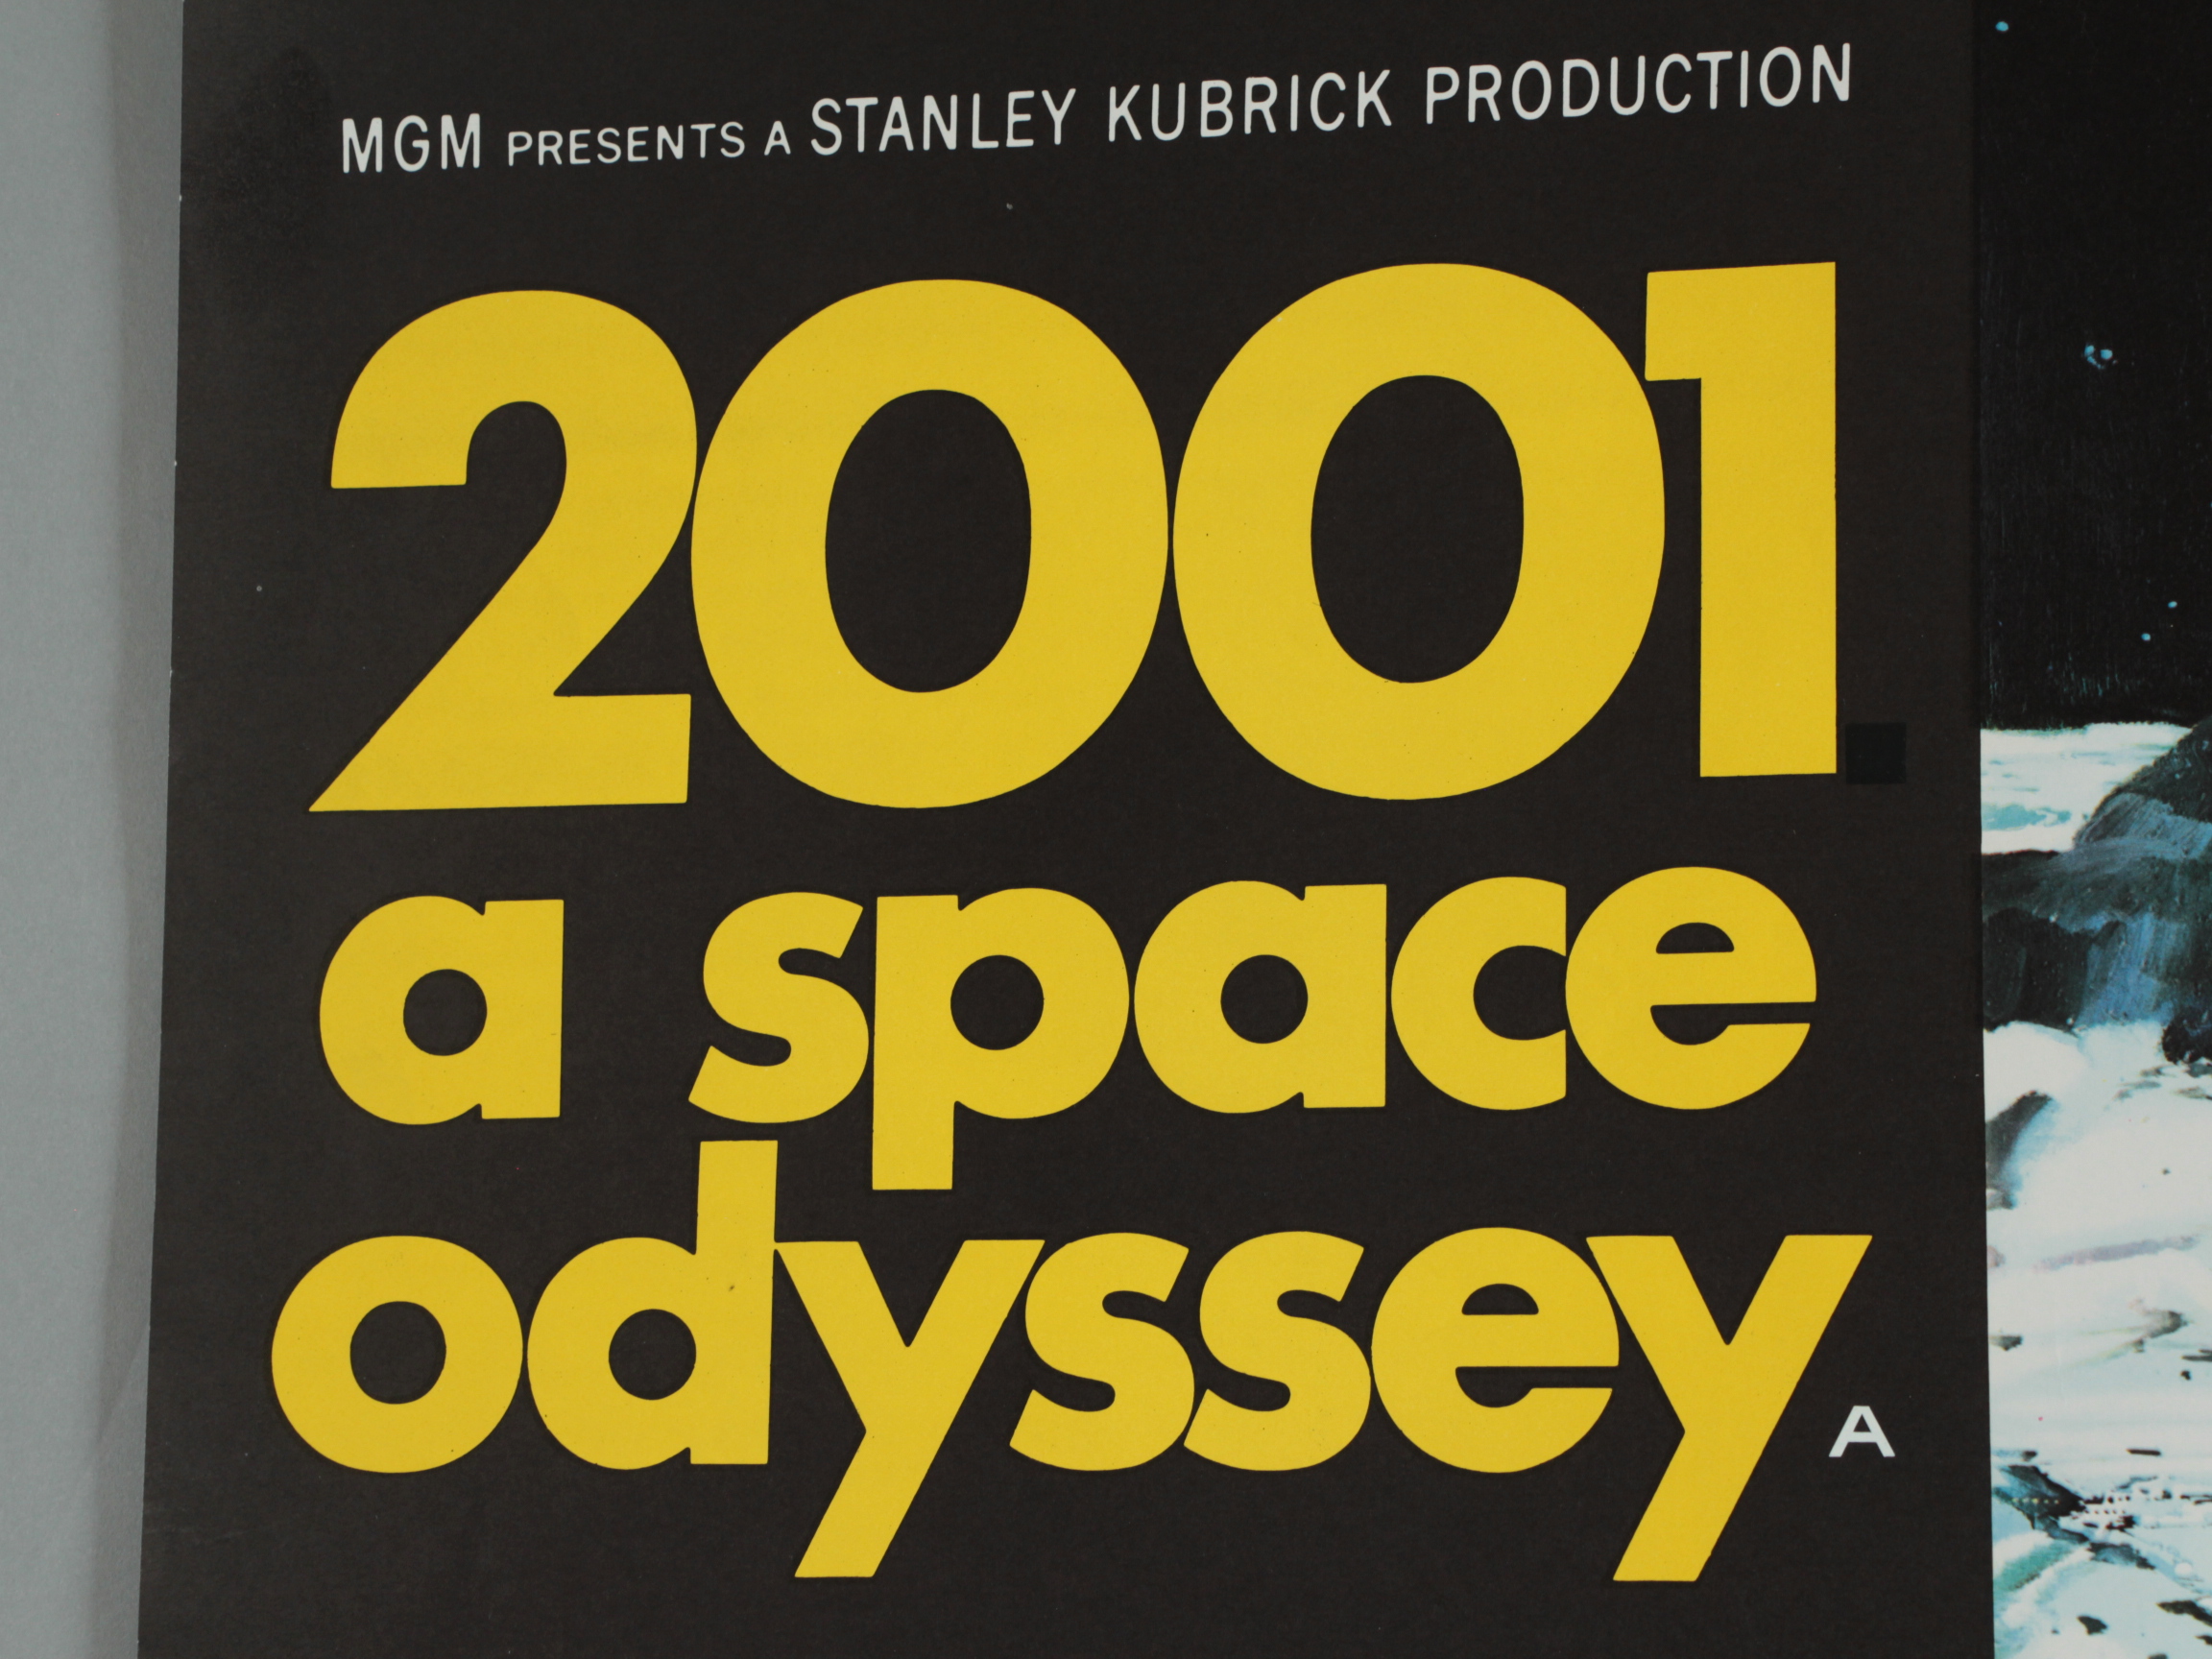 2001 A SPACE ODYSSEY 1968 first release British Quad film poster directed by Stanley Kubrick - Image 7 of 9